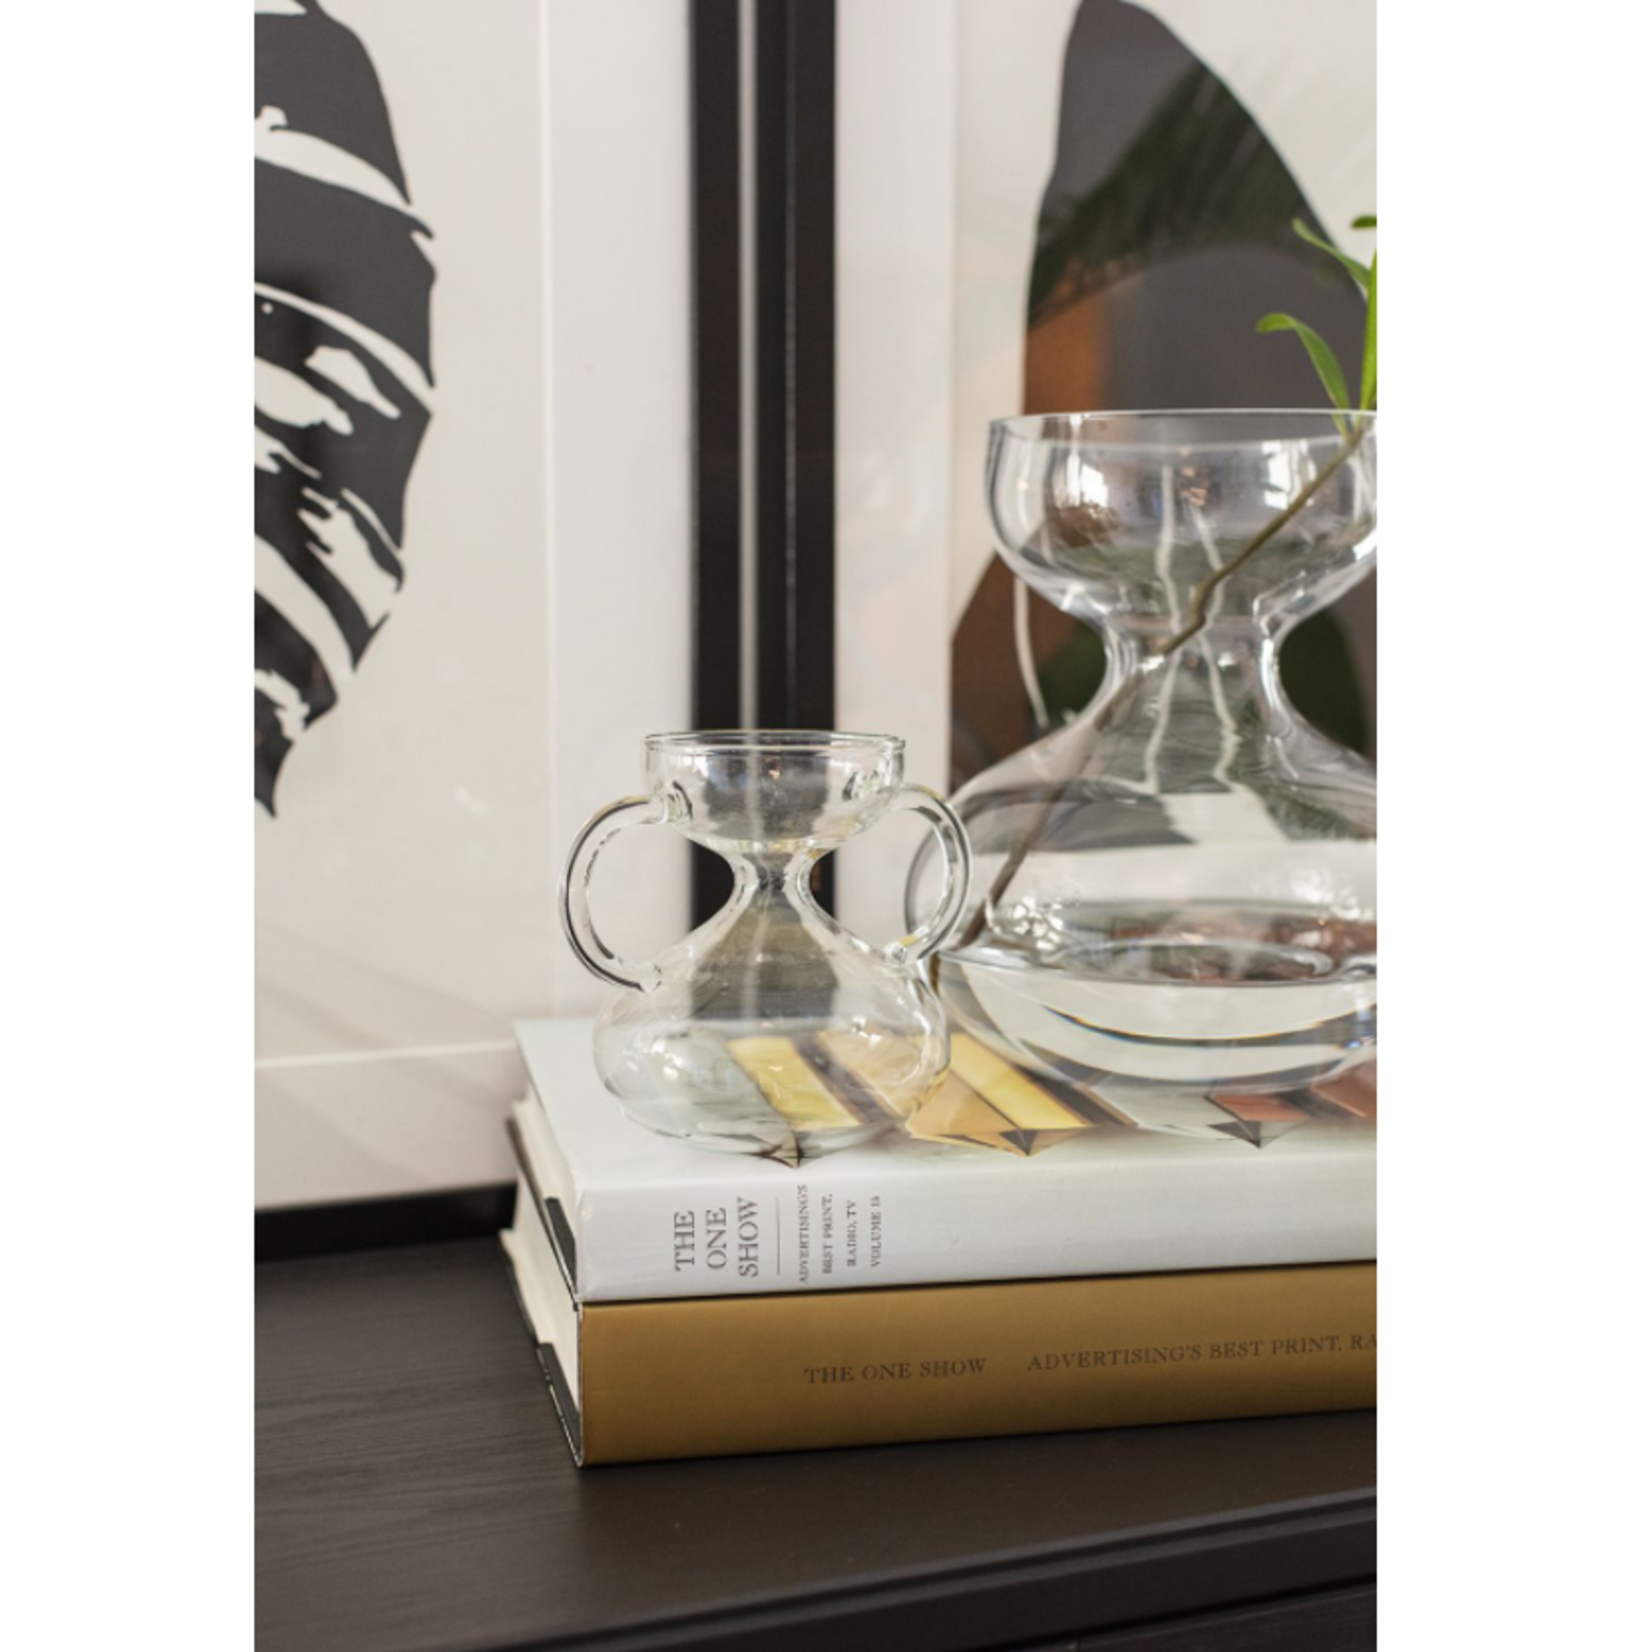 50% off was $20 now $10.00, 8”H X 6.75” ASHBY HOUR GLASS BUDVASE